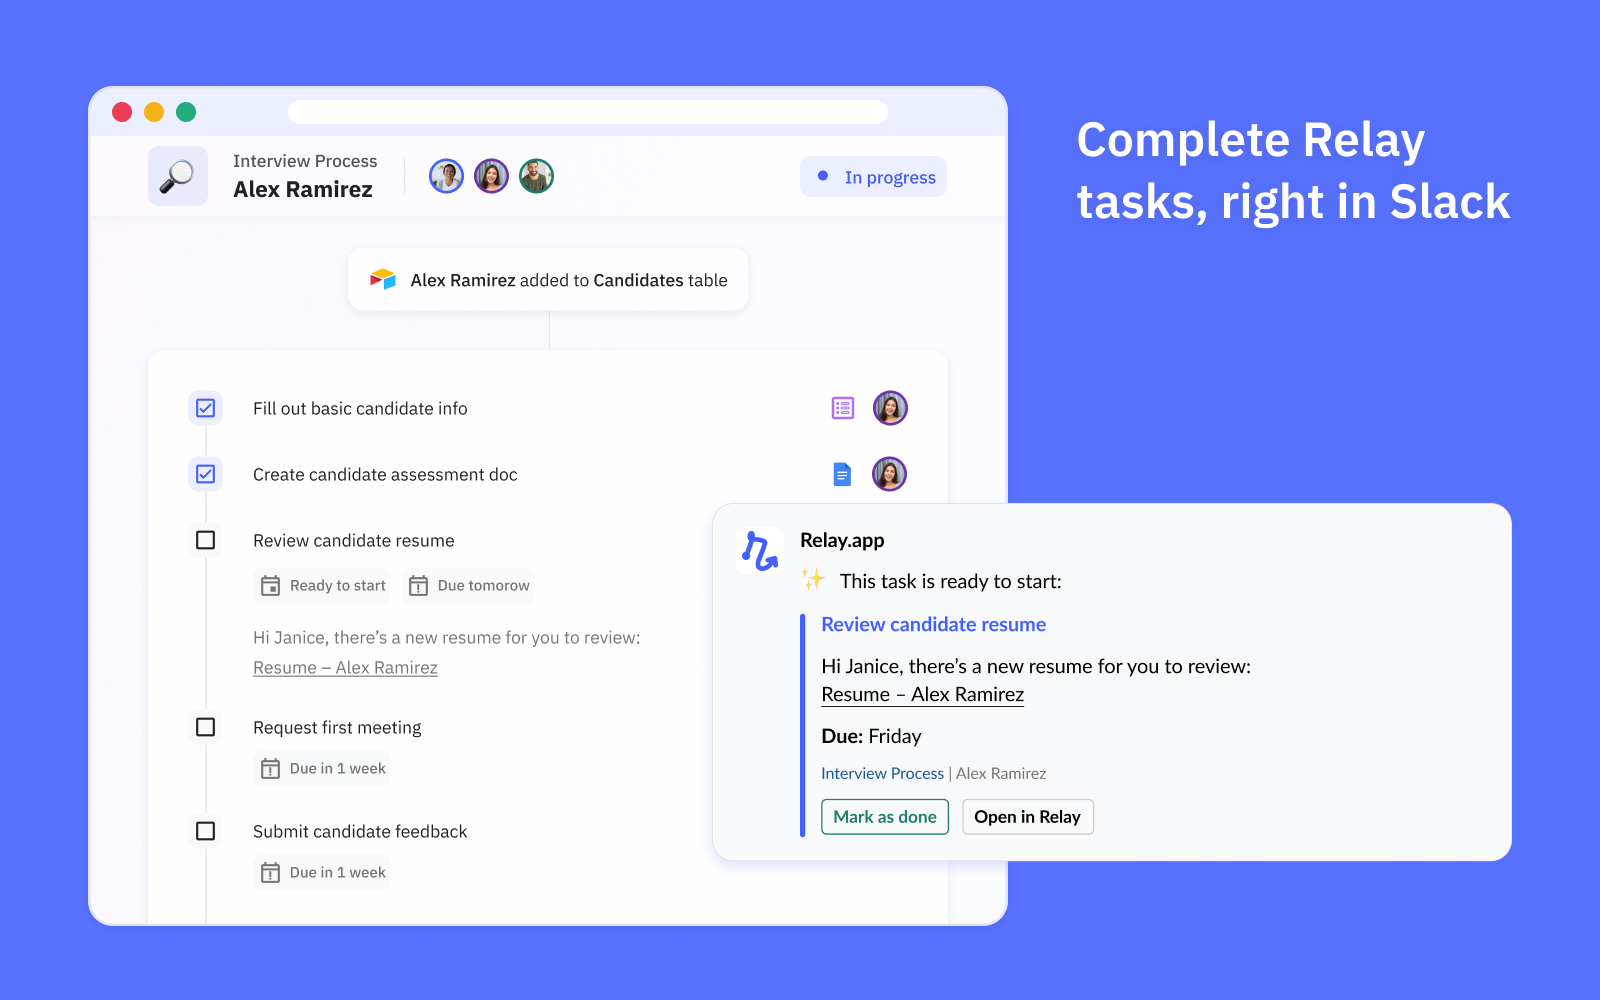 Tasks and forms in Relay.app can be completed right from within Slack